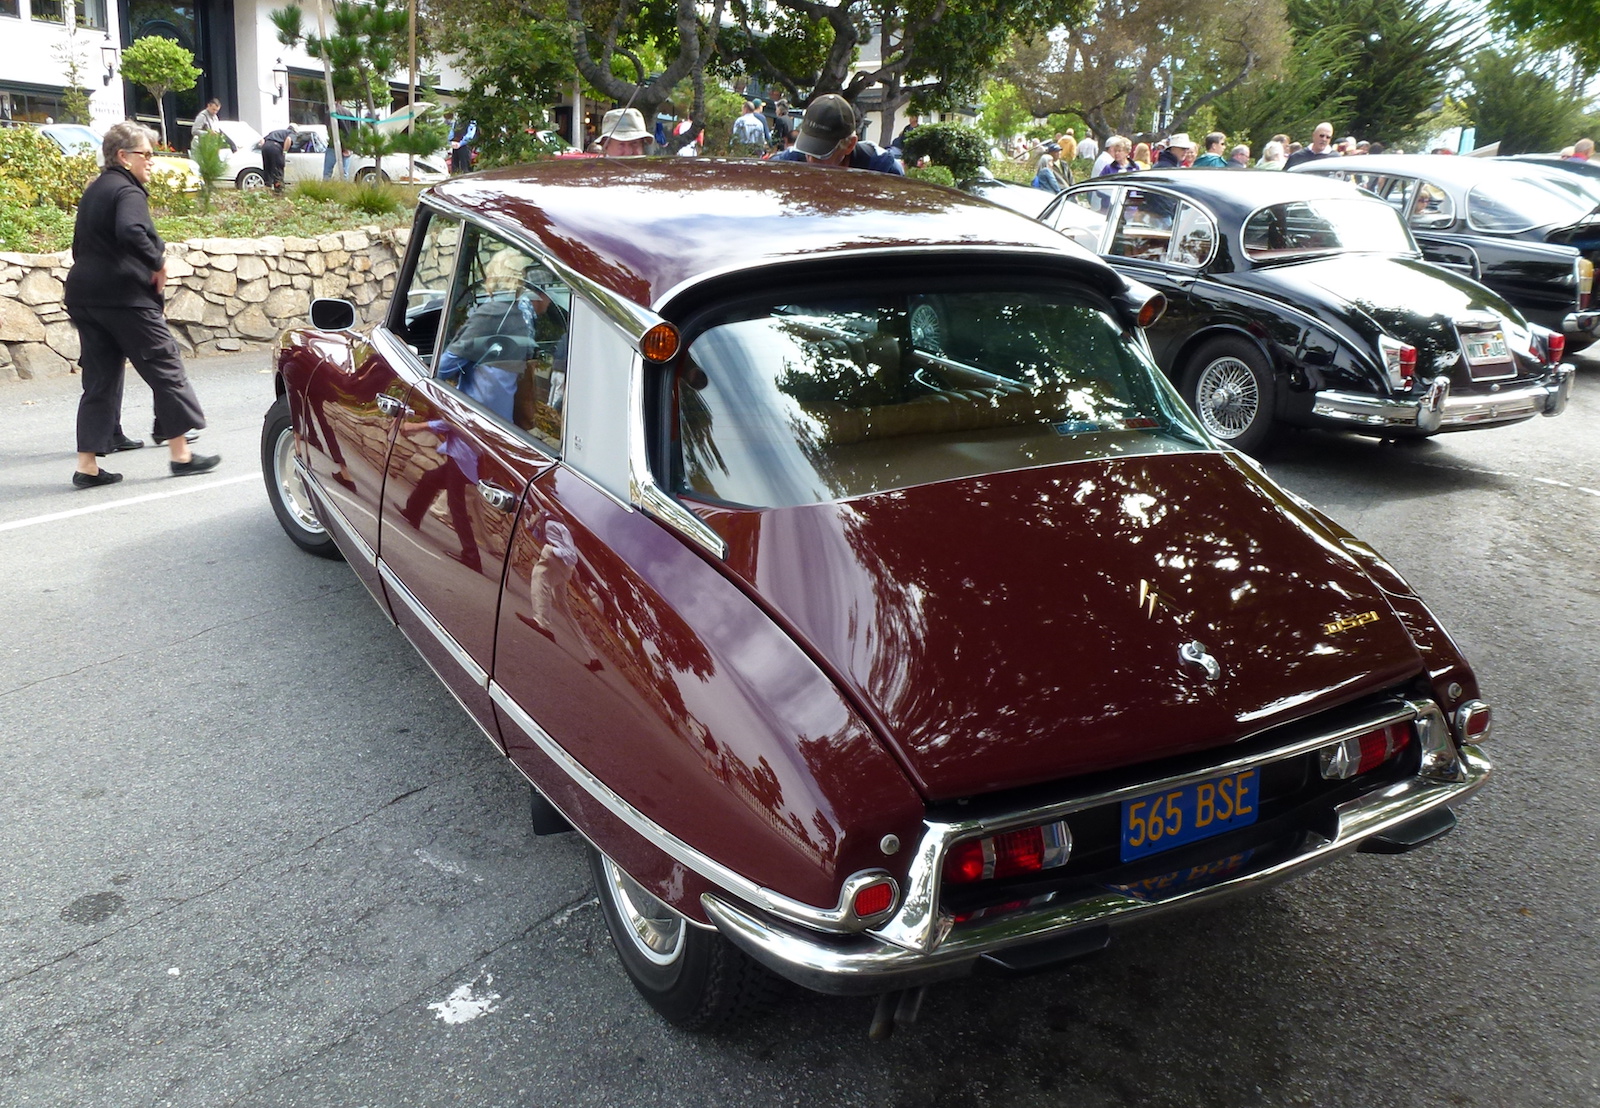 The Citroën DS - a car from the future? 